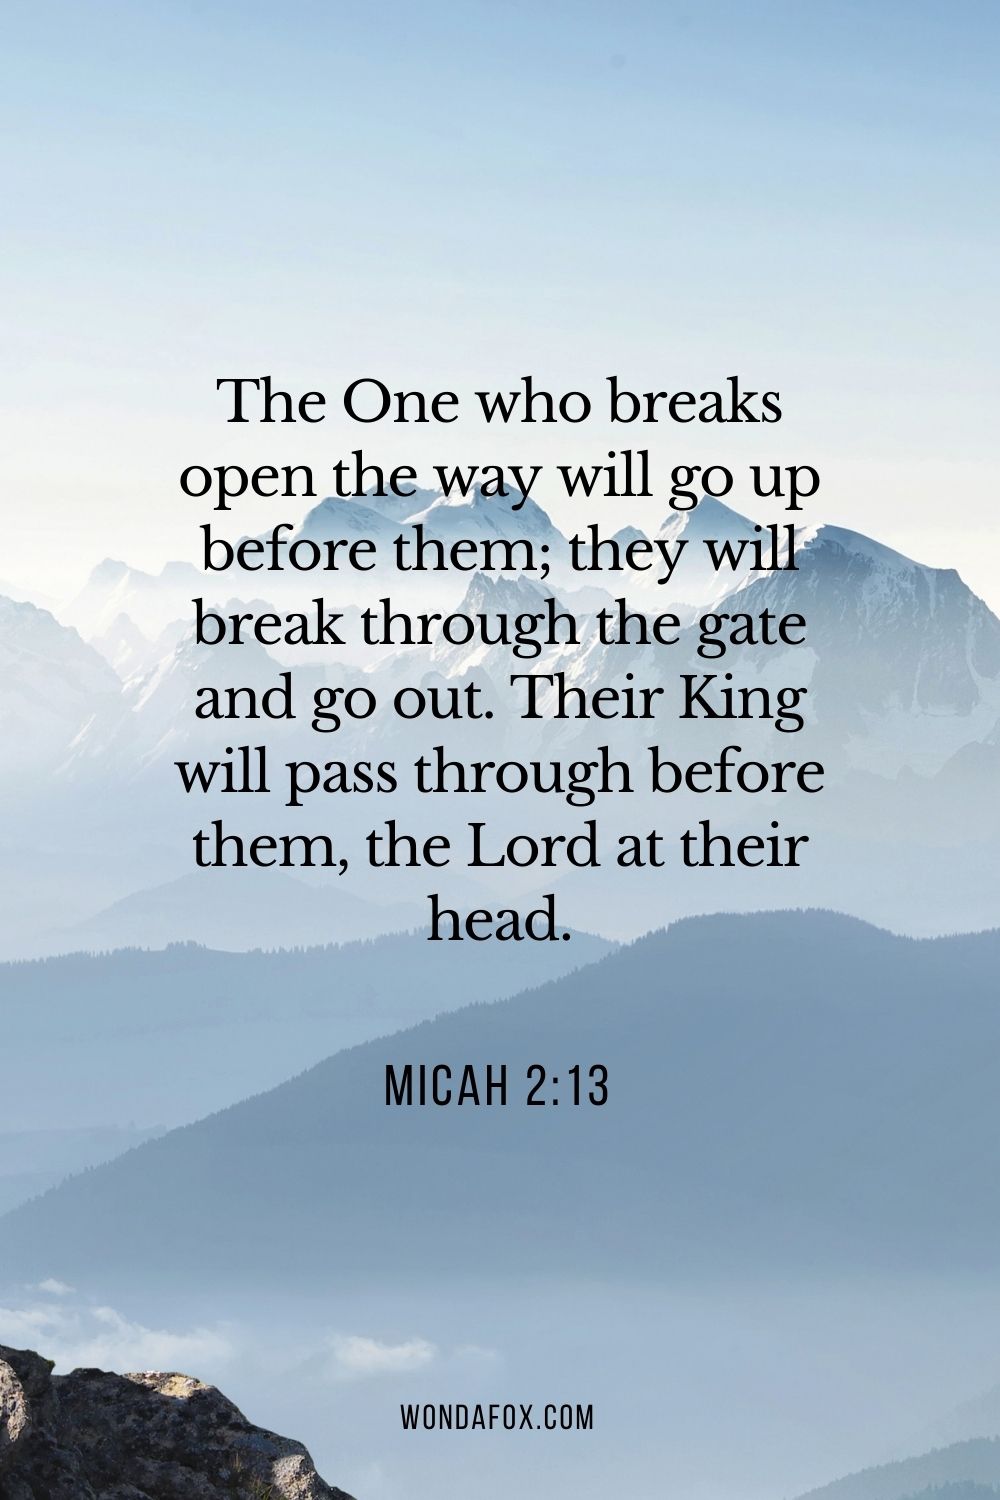 The One who breaks open the way will go up before them; they will break through the gate and go out. Their King will pass through before them, the Lord at their head.